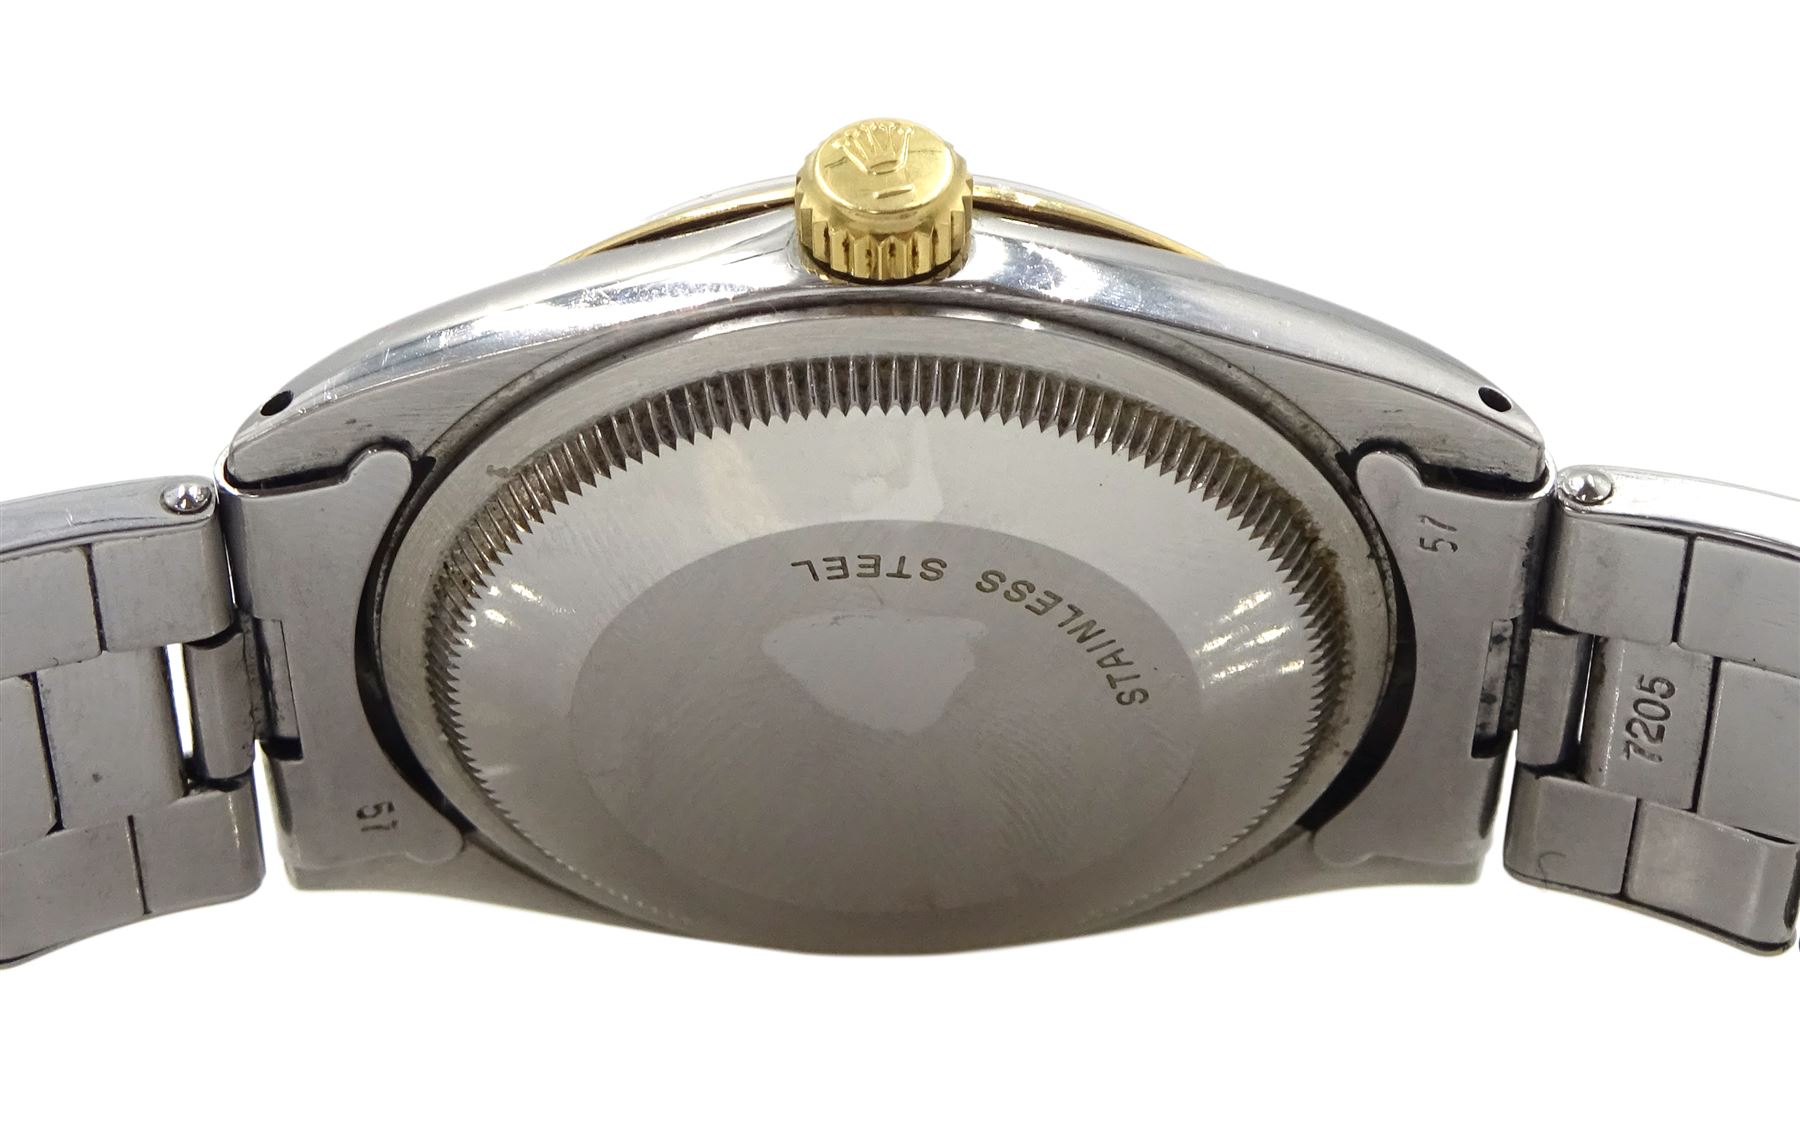 Rolex Oyster Perpetual Zephyr gentleman's gold and stainless steel wristwatch - Image 4 of 8